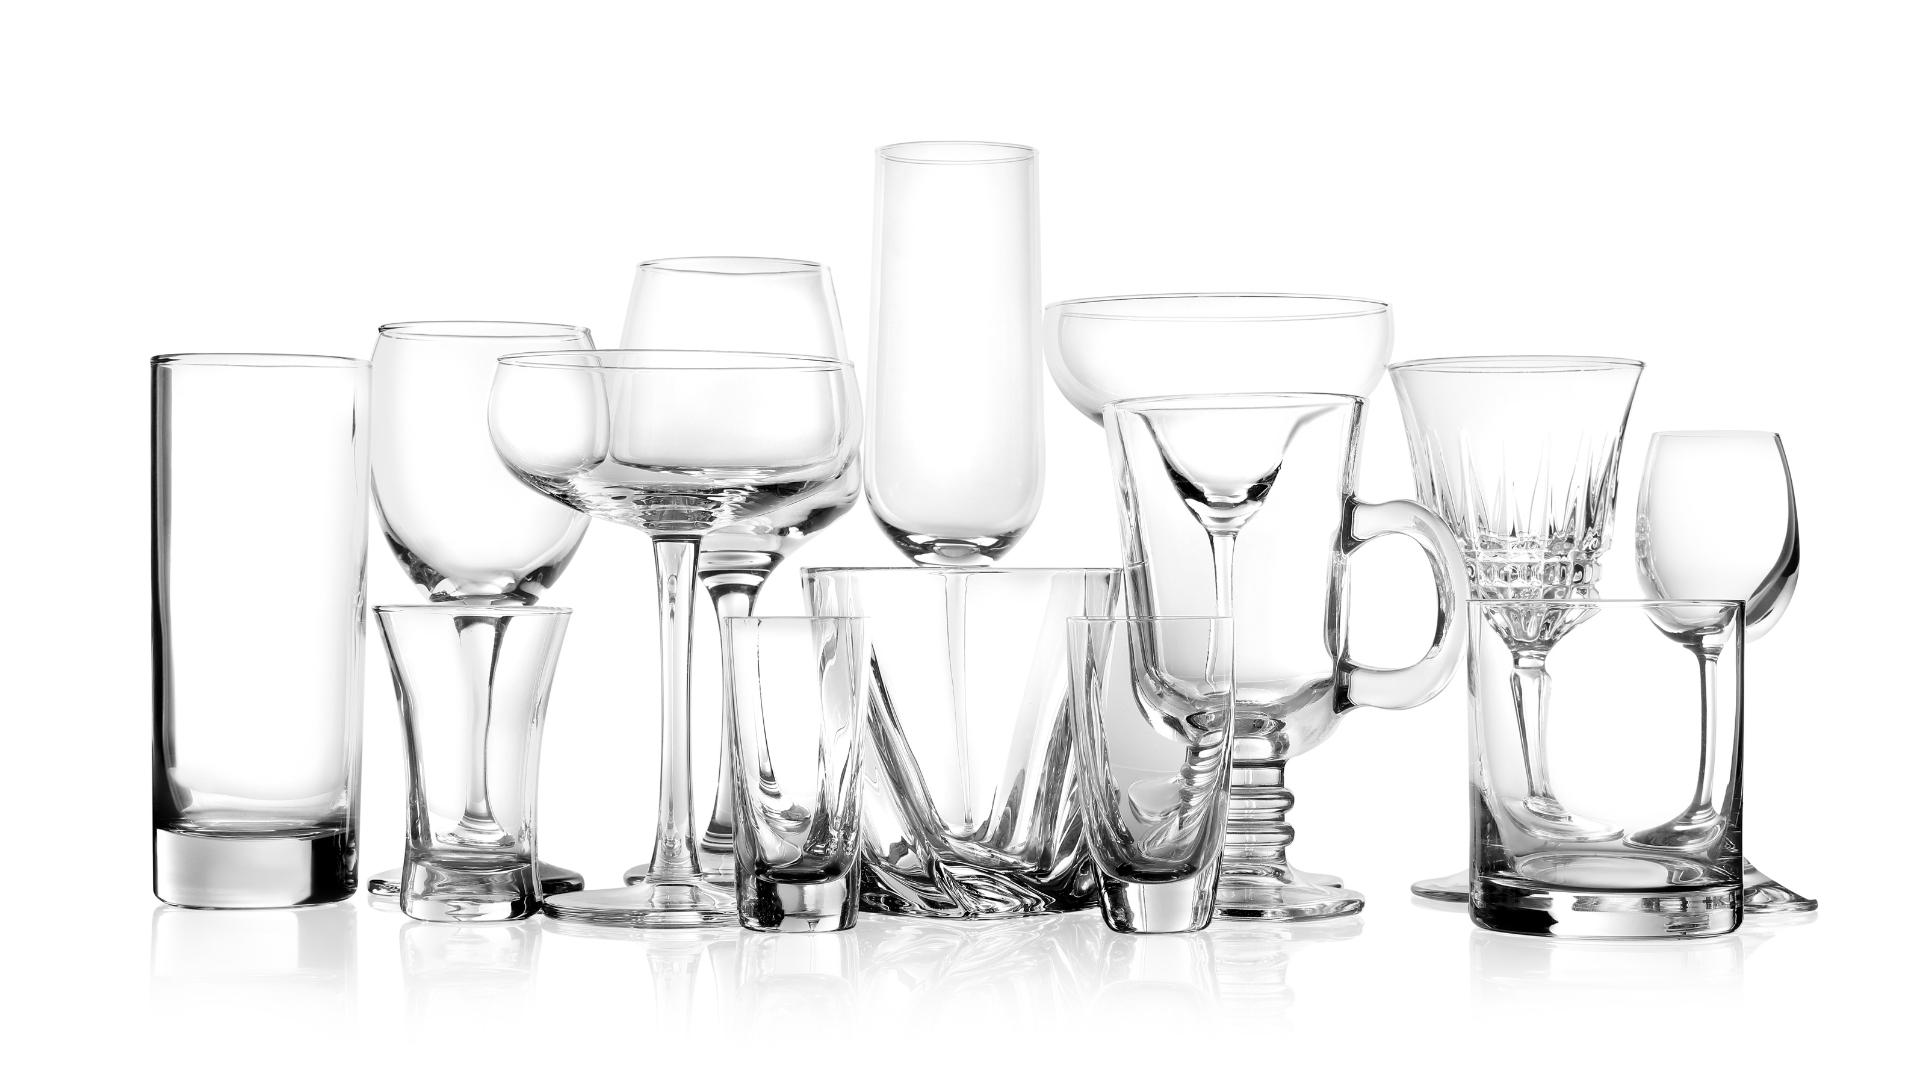 glassware that would be at a bar